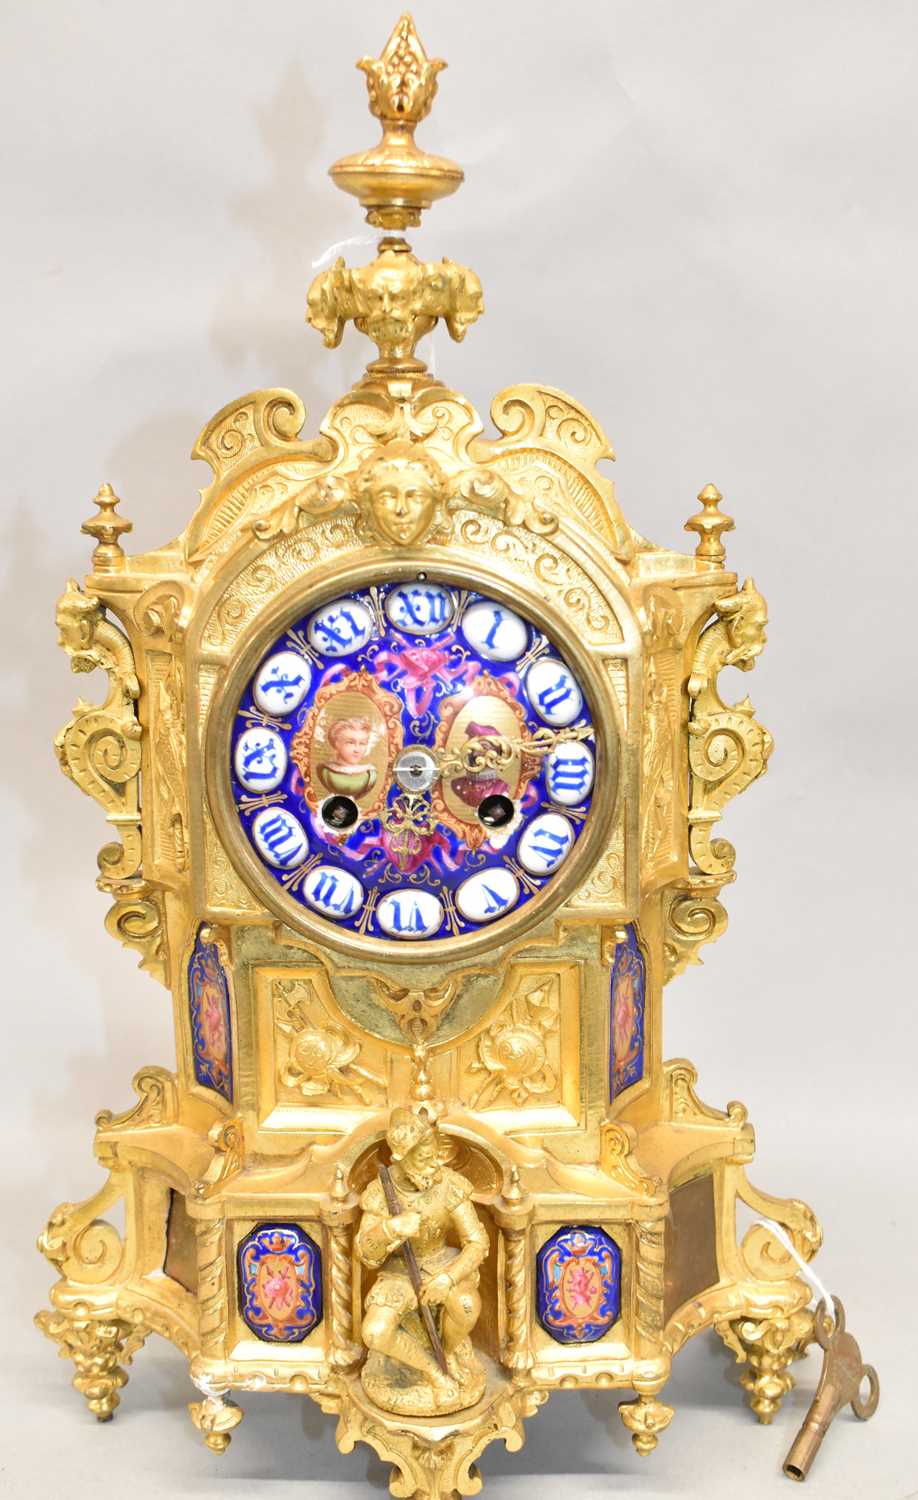 A late 19th century French ormolu mantel clock with enamel dial and inset enamel panels, height